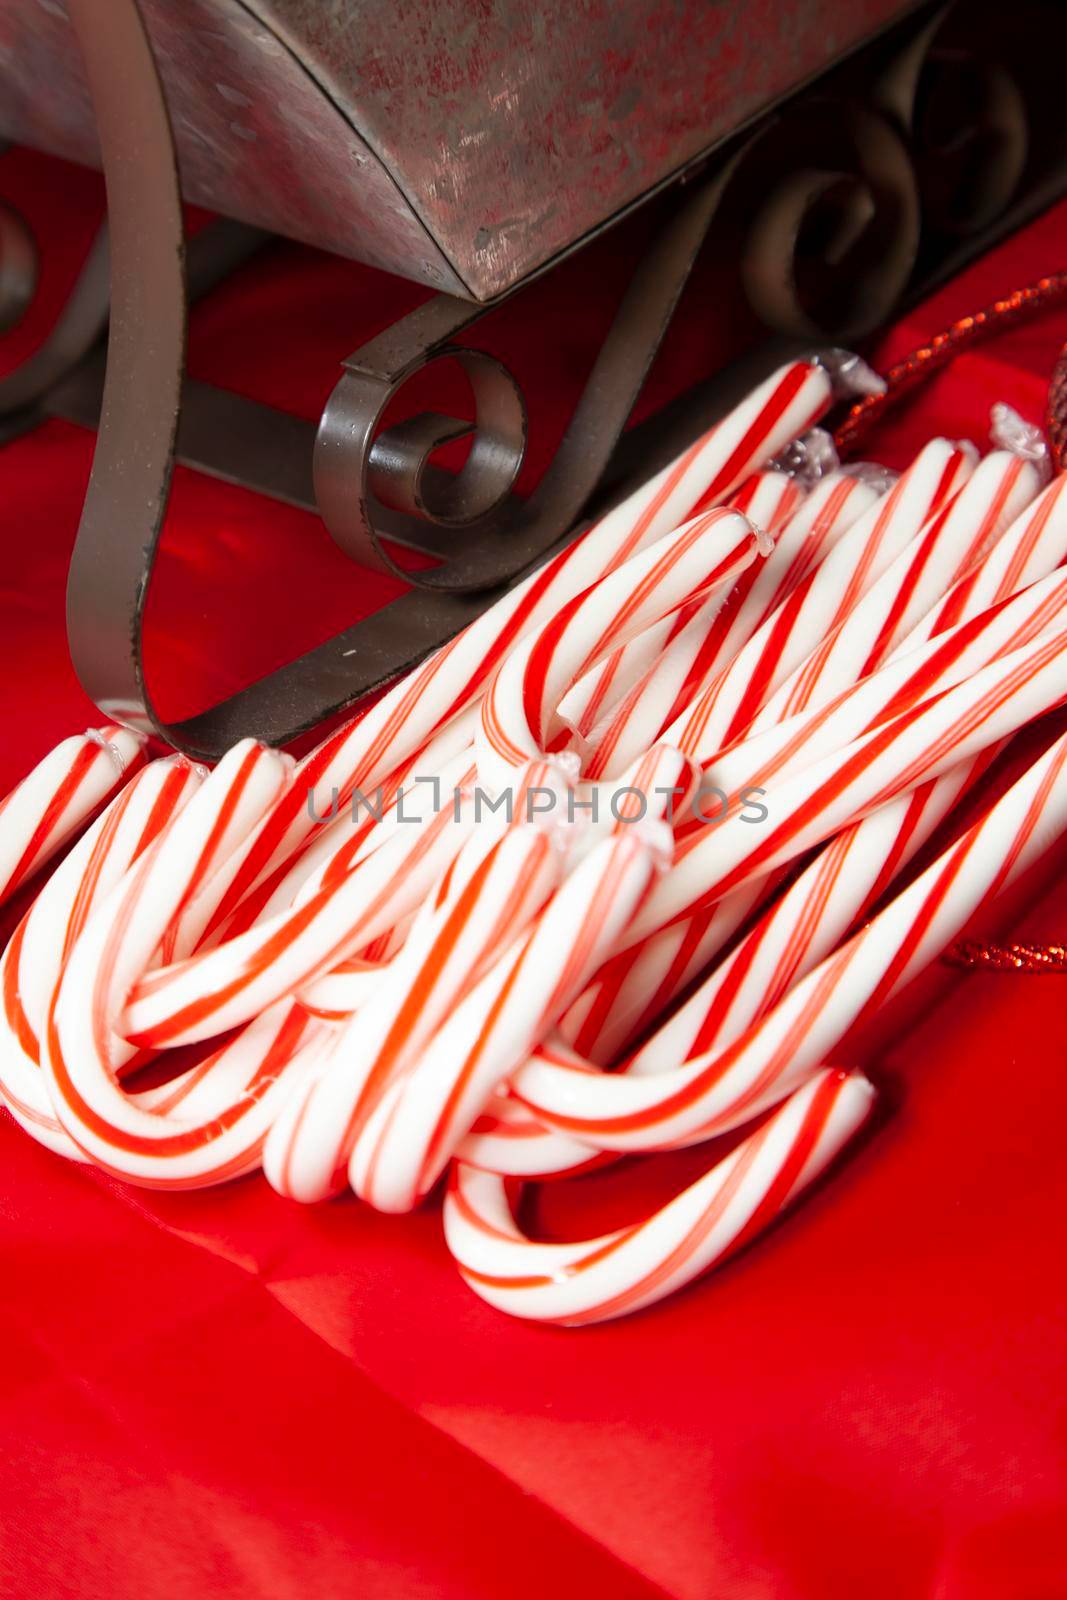 Candy Canes in a Christmas Setting by tornado98